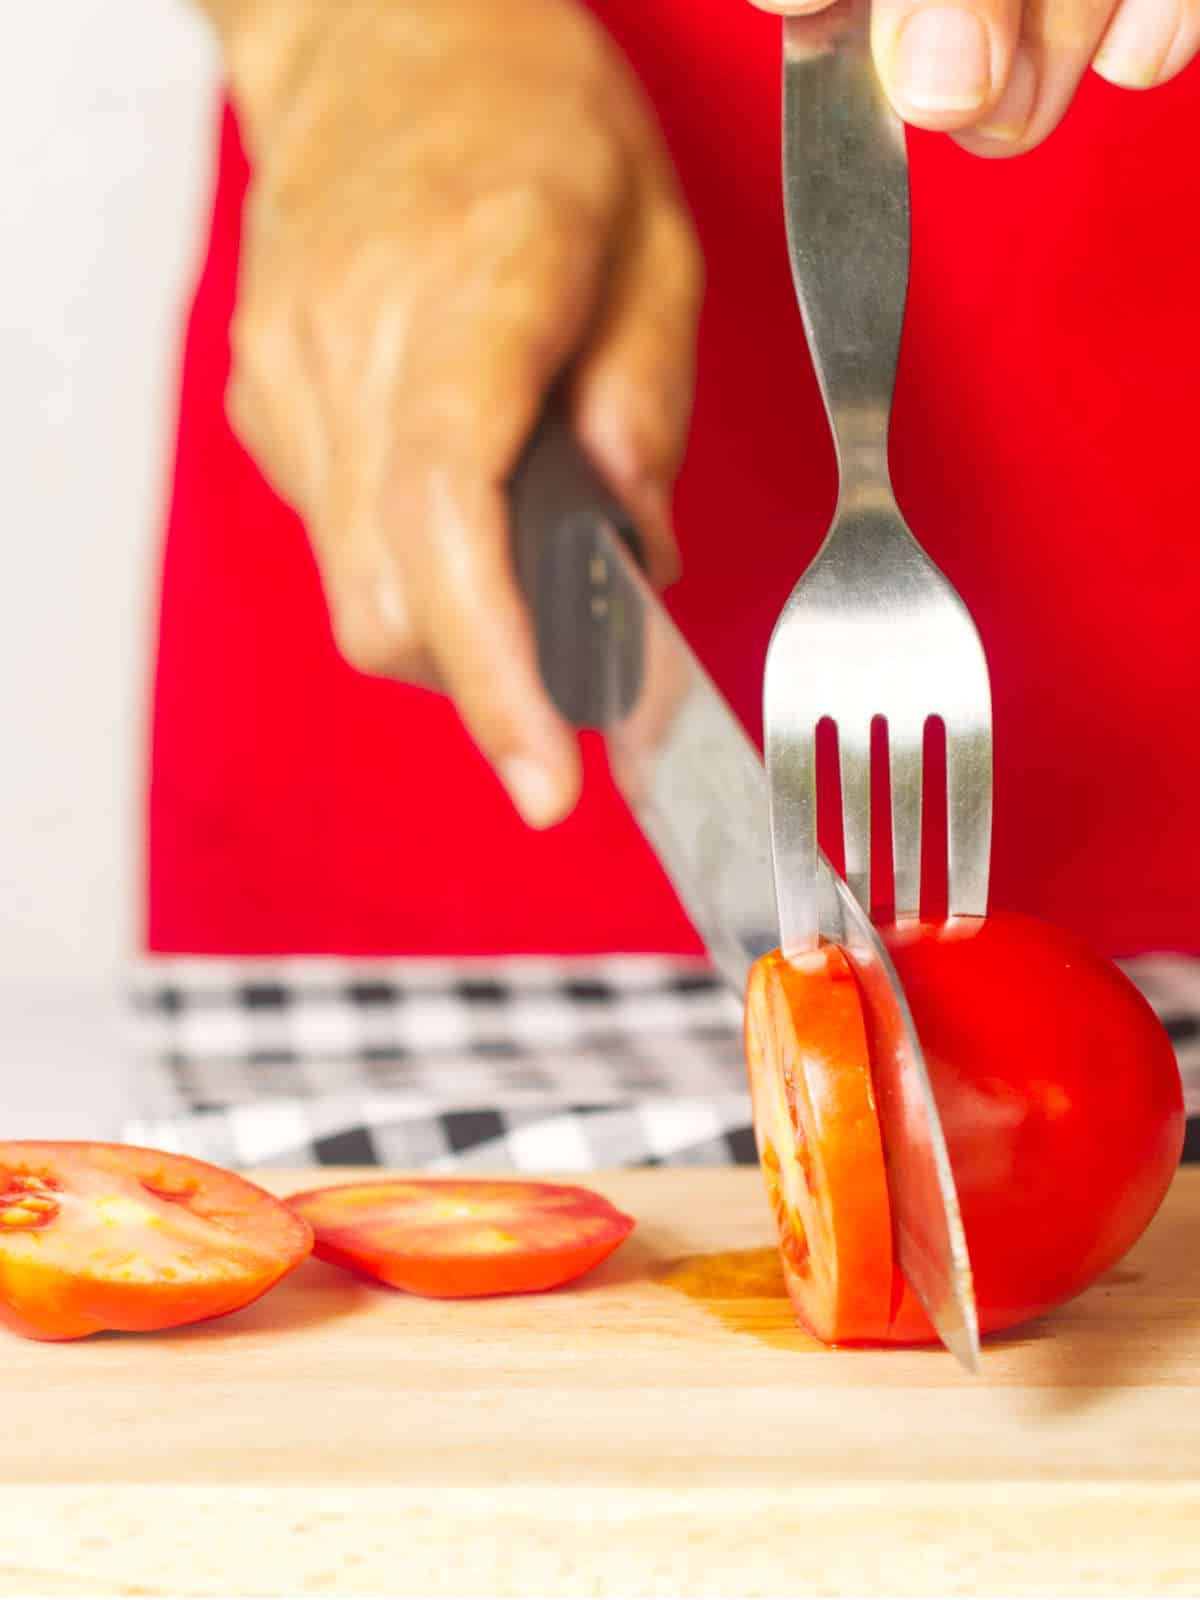 using a fork to help cut a tomato into perfect slices.